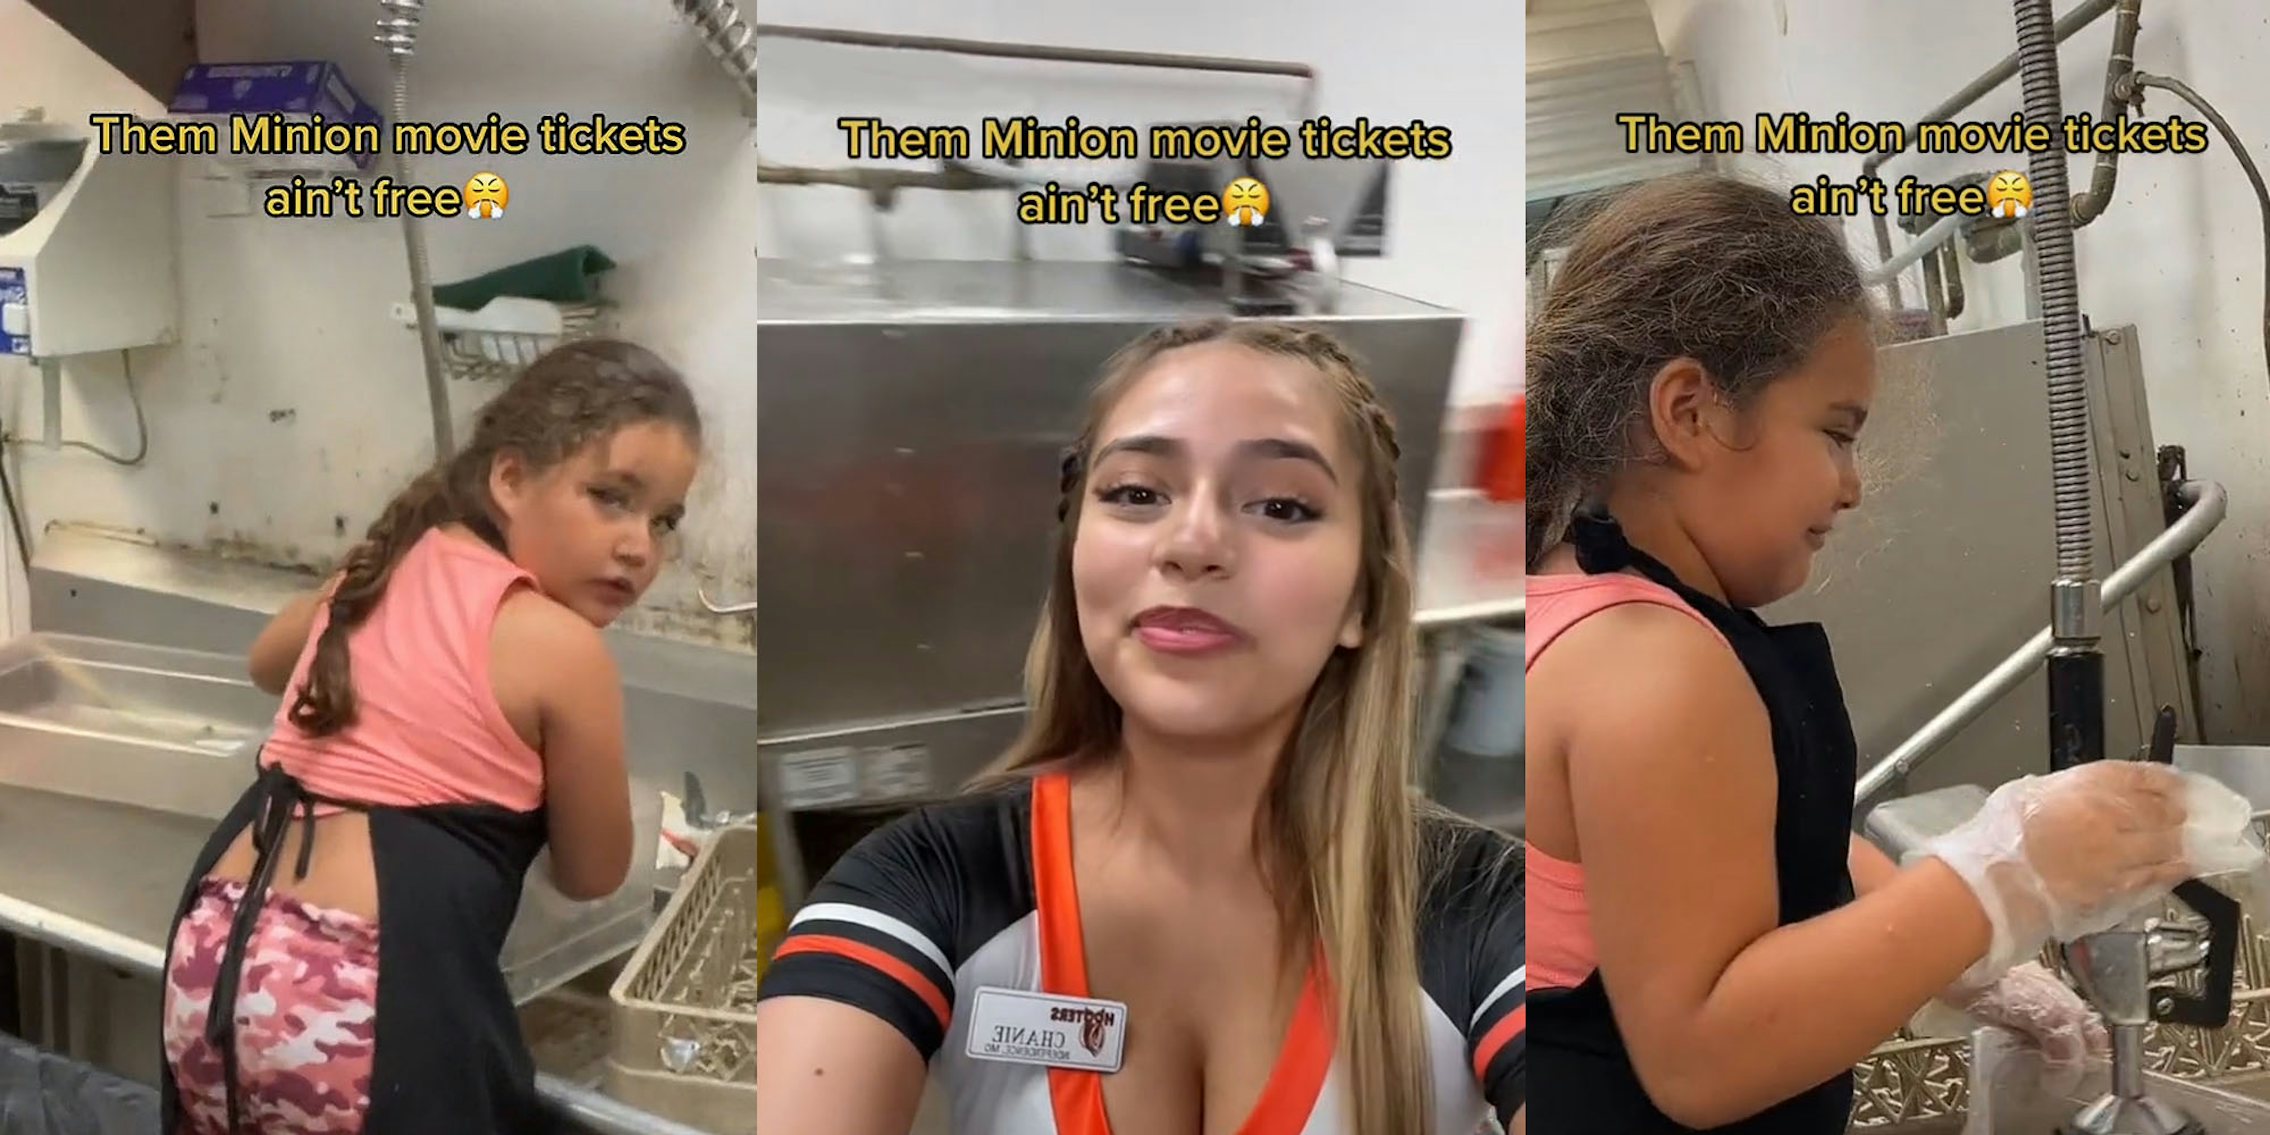 little girl cleaning dishes in back of Hooters caption 'Them Minion movie tickets ain't free' (l) Hooters worker spinning camera caption 'Them Minion movie tickets ain't free' (c) little girl cleaning dishes in back of Hooters caption 'Them Minion movie tickets ain't free' (r)